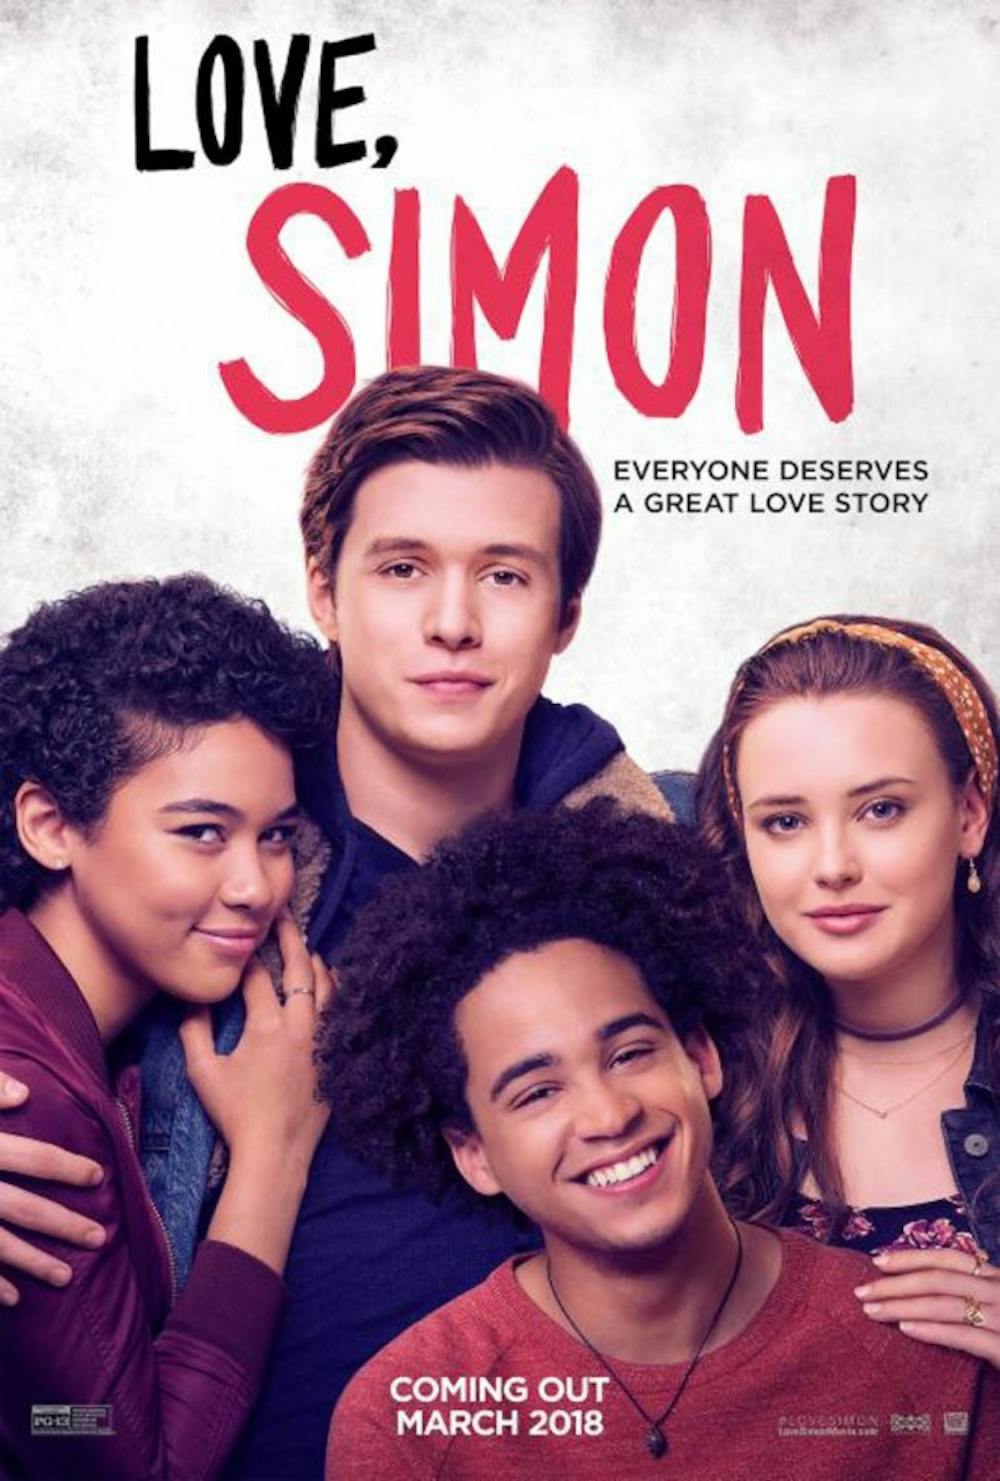 "Love, Simon" stars Nick Robinson as a gay teen struggling to decide whether or not he should keep his sexuality a secret.&nbsp;